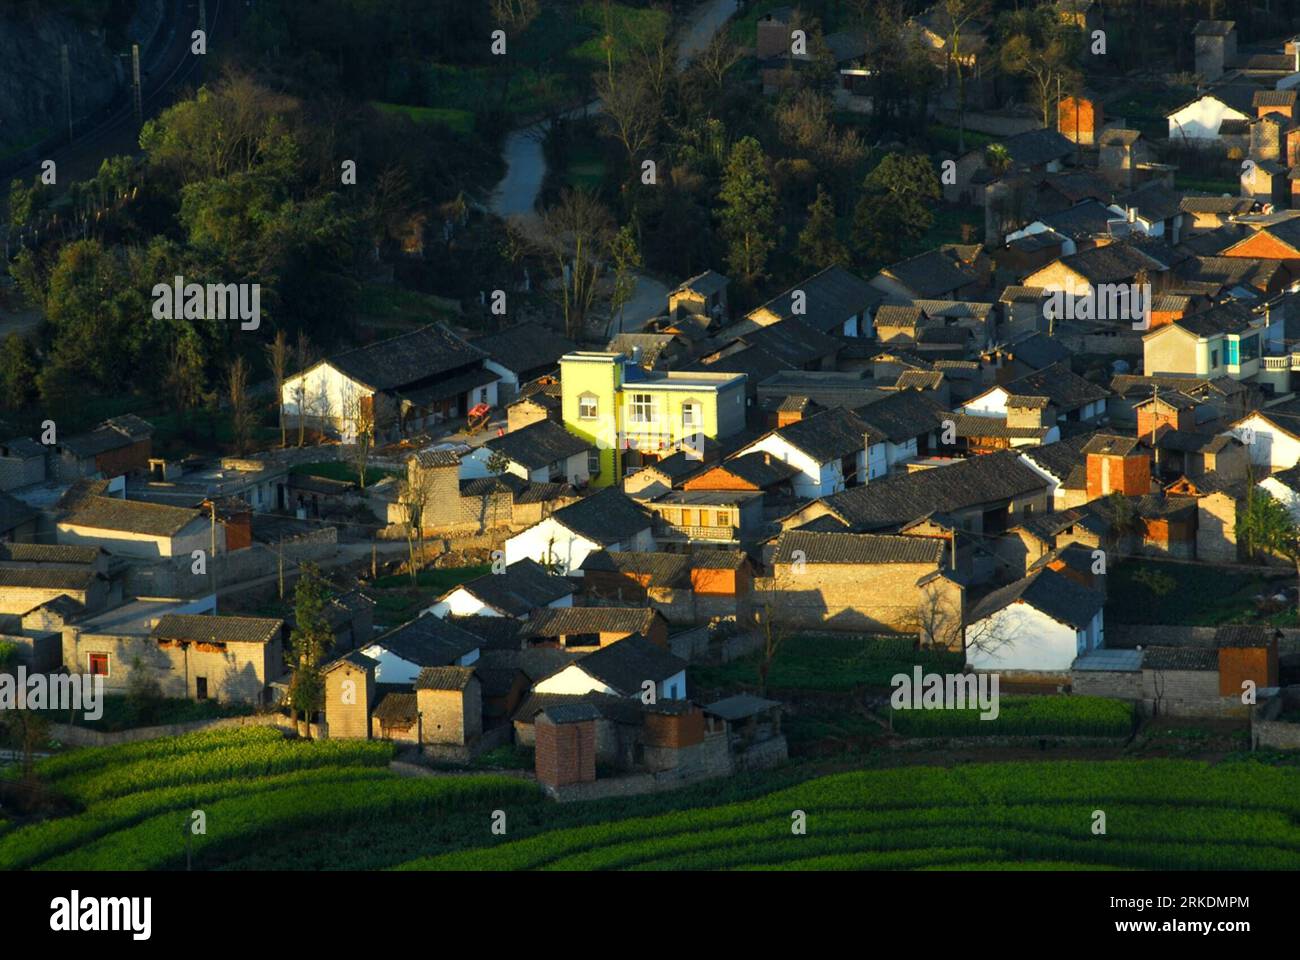 Bildnummer: 54970525  Datum: 28.02.2011  Copyright: imago/Xinhua (110301) -- LUOPING, March 1, 2011 (Xinhua) -- Photo taken on Feb. 28, 2011 shows a village located among blooming cole field in Luoping, southwest China s Yunnan Province. The cole flowers in Luoping entered the blossom season recently. (Xinhua/Mao Hong) (zgp)  CHINA-YUNNAN-LUOPING-KARST-SPRING SCENERY (CN) PUBLICATIONxNOTxINxCHN Reisen kbdig xkg 2011 quer o0 Landschaft, Totale, Perspektive, Vogelperspektive, Luftaufnahme,    Bildnummer 54970525 Date 28 02 2011 Copyright Imago XINHUA  Luoping March 1 2011 XINHUA Photo Taken ON F Stock Photo